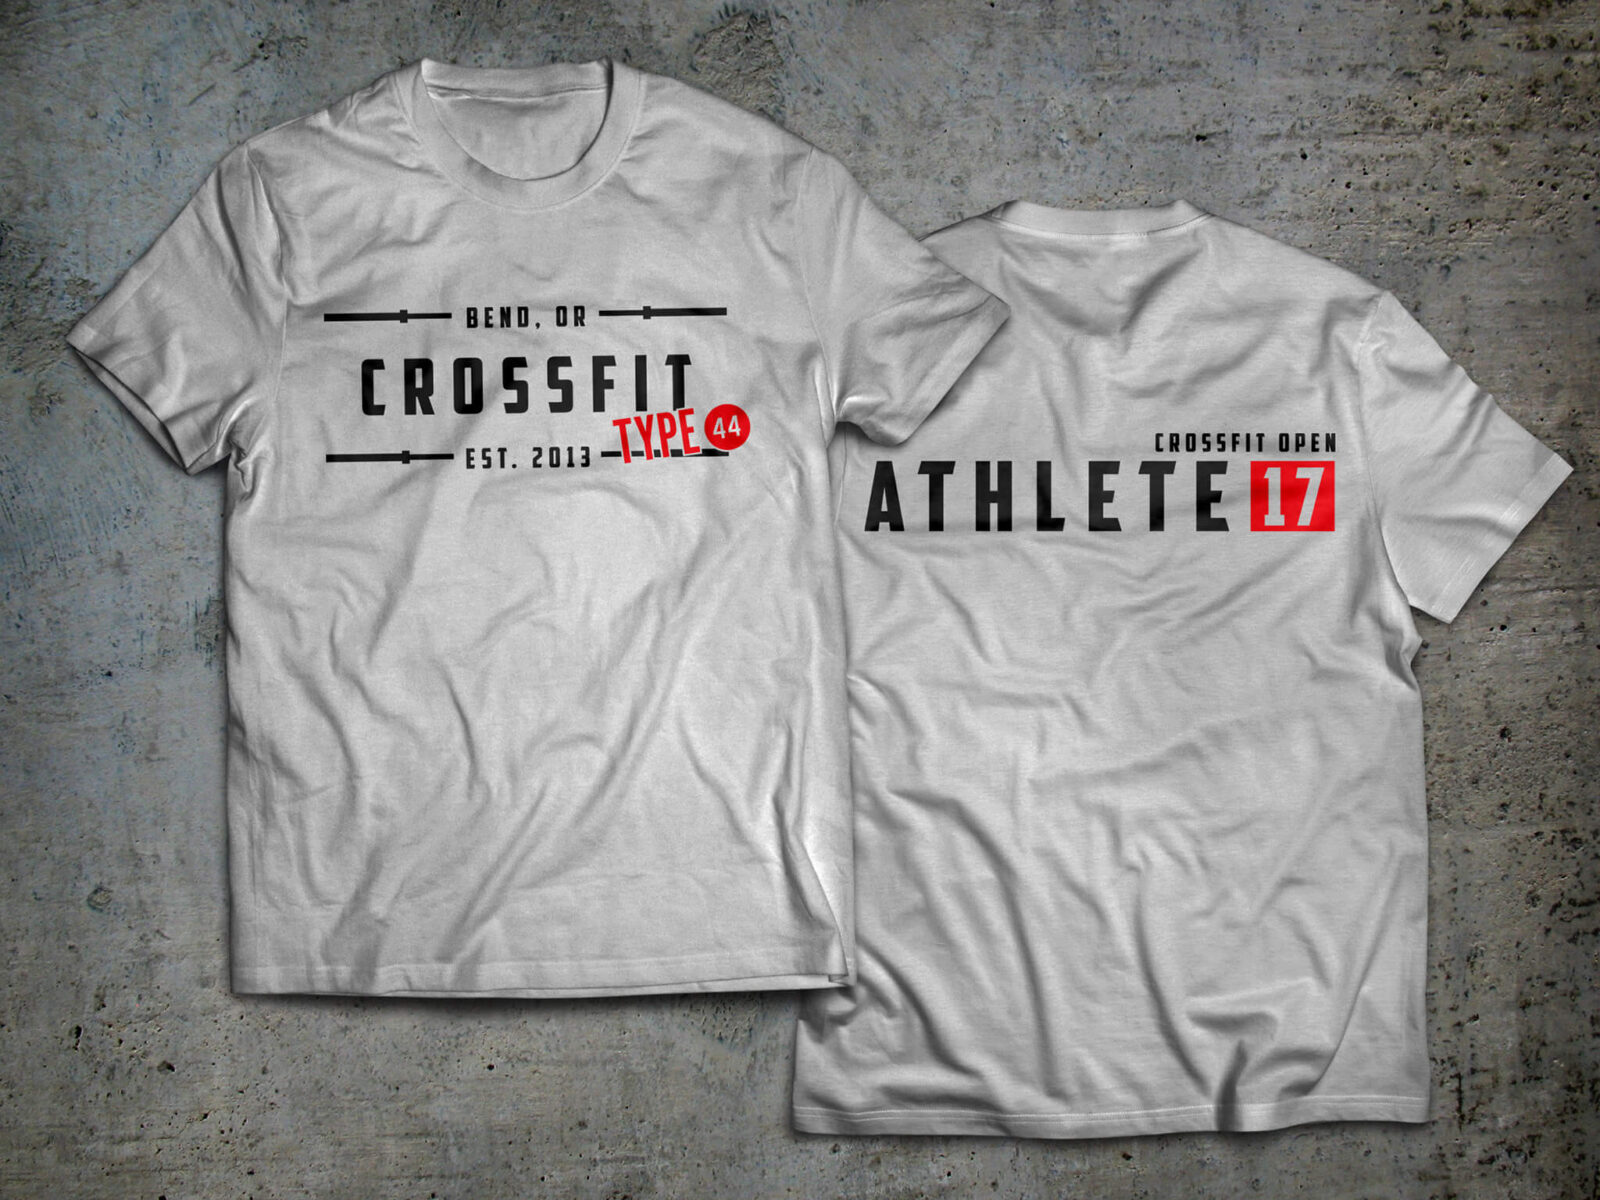 Apparel for Type 44 CrossFit in Bend, Oregon